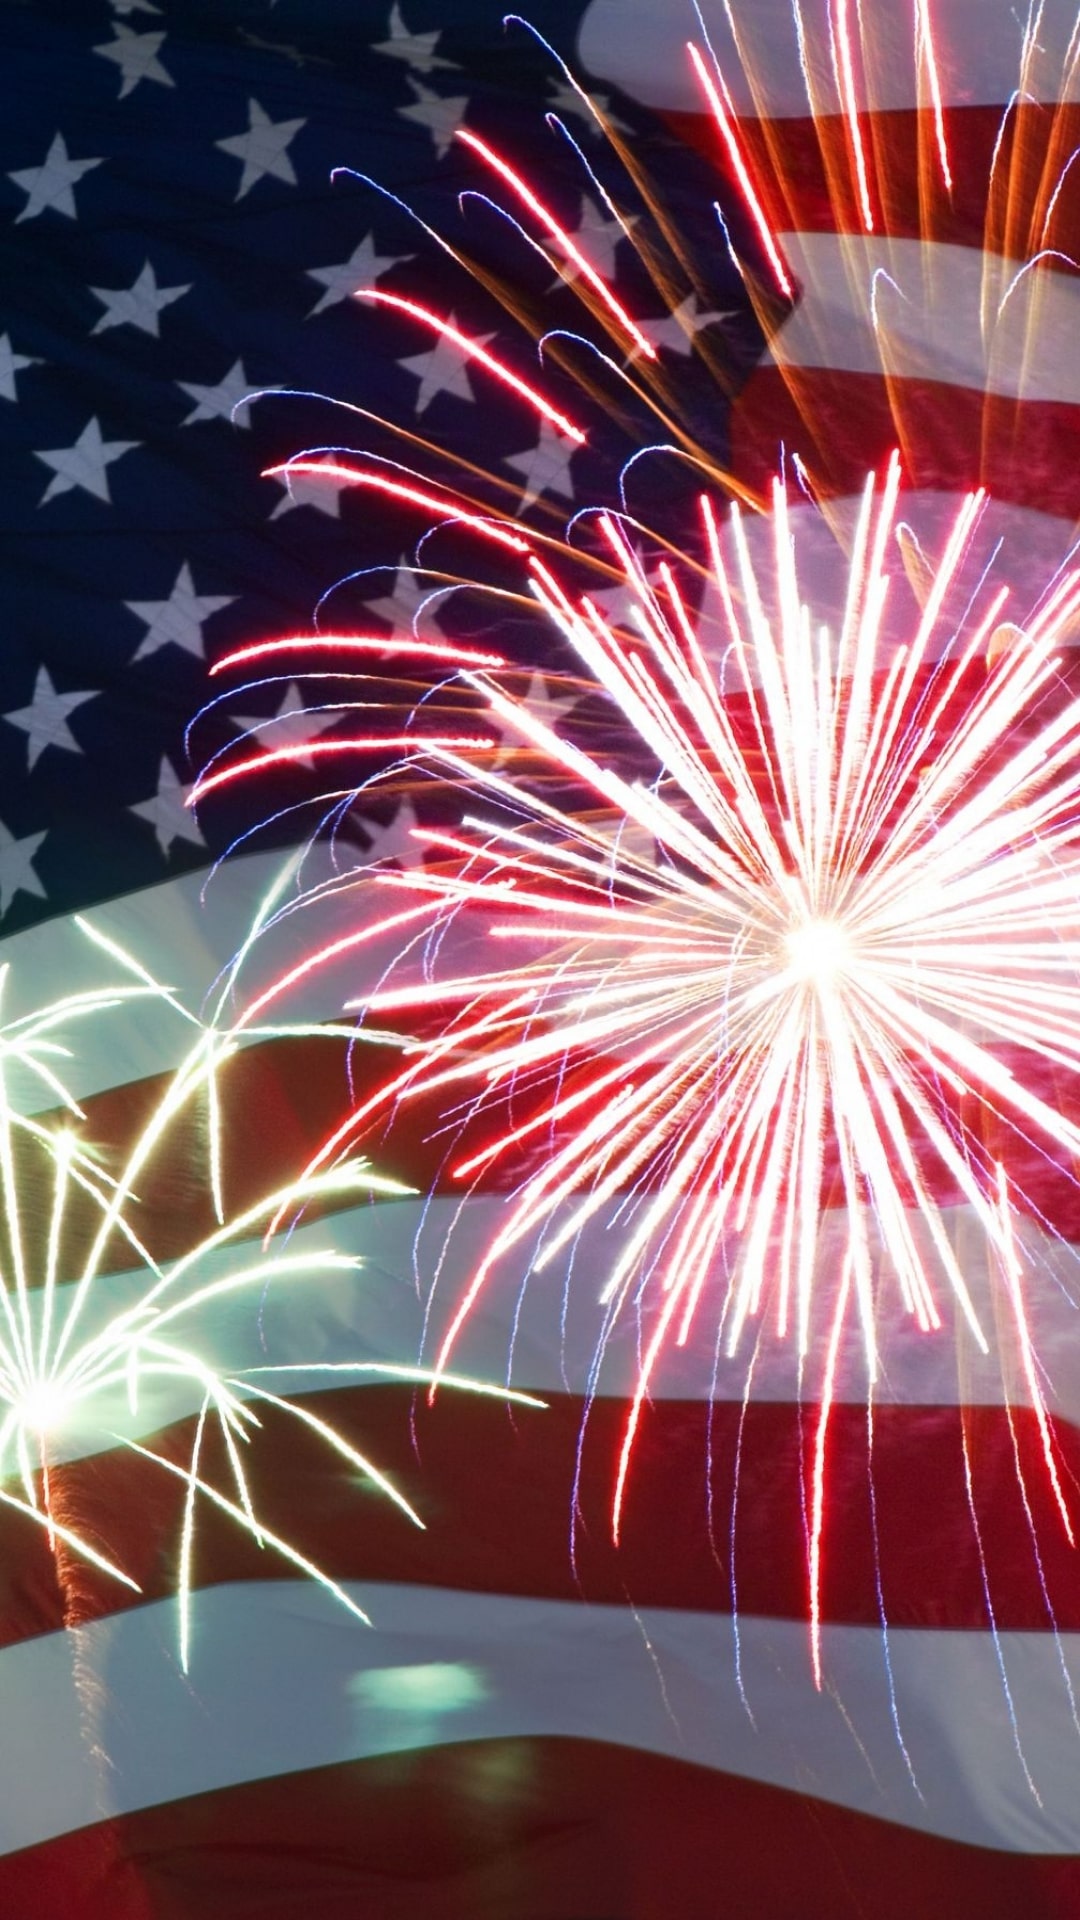 Vibrant 4th of July Backgrounds to Light Up Your Day!